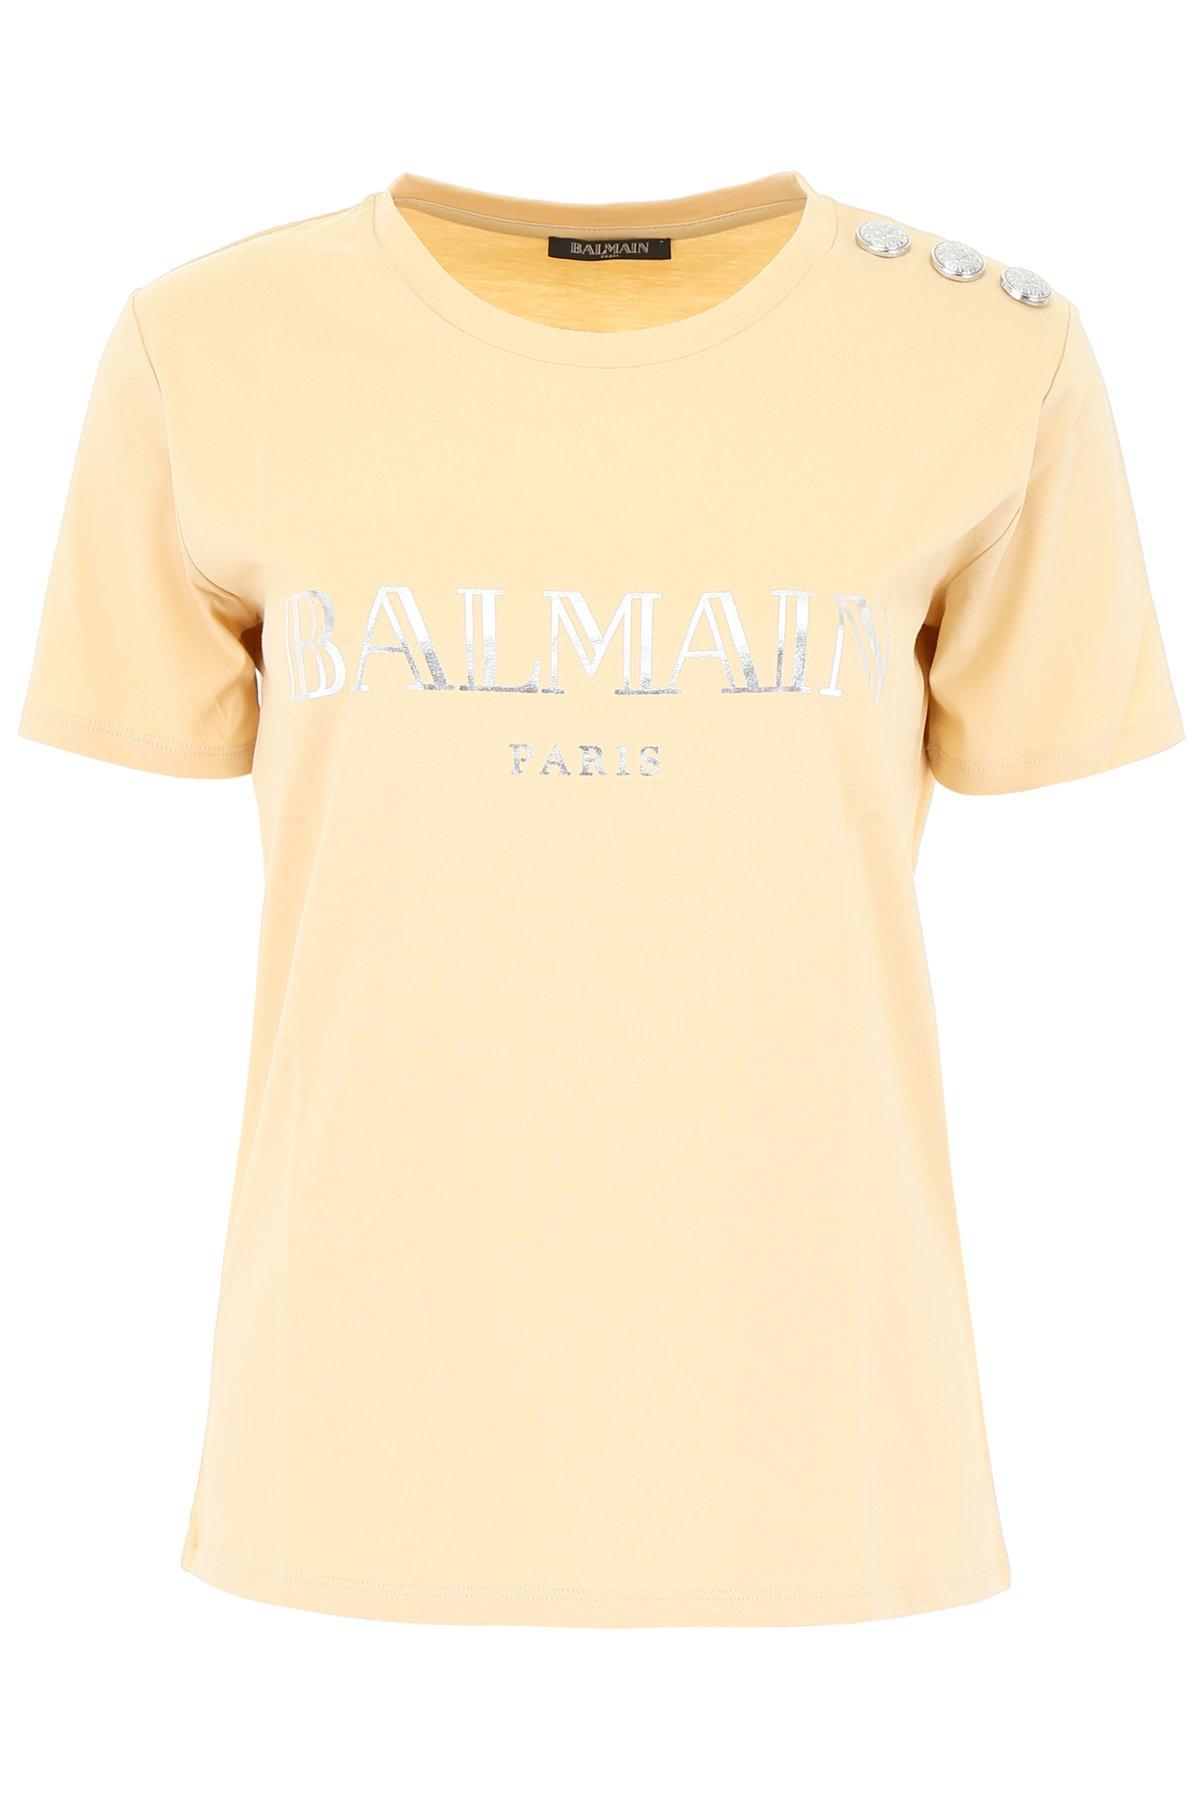 Balmain Cotton Logo Fitted T-shirt in Yellow - Lyst